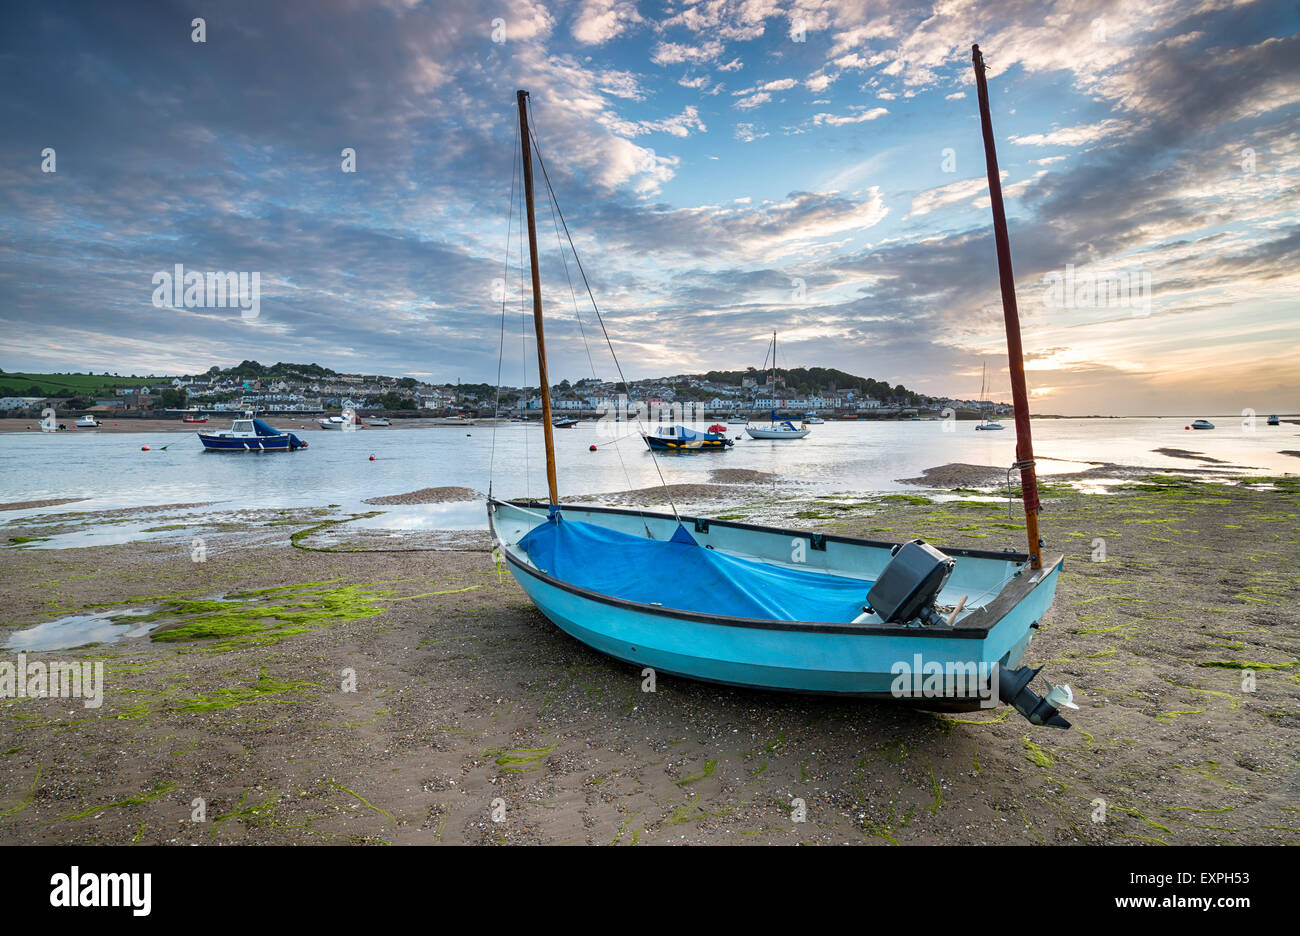 A sailing boat on the beach at Instow, looking out to Appledore across the bay Stock Photo